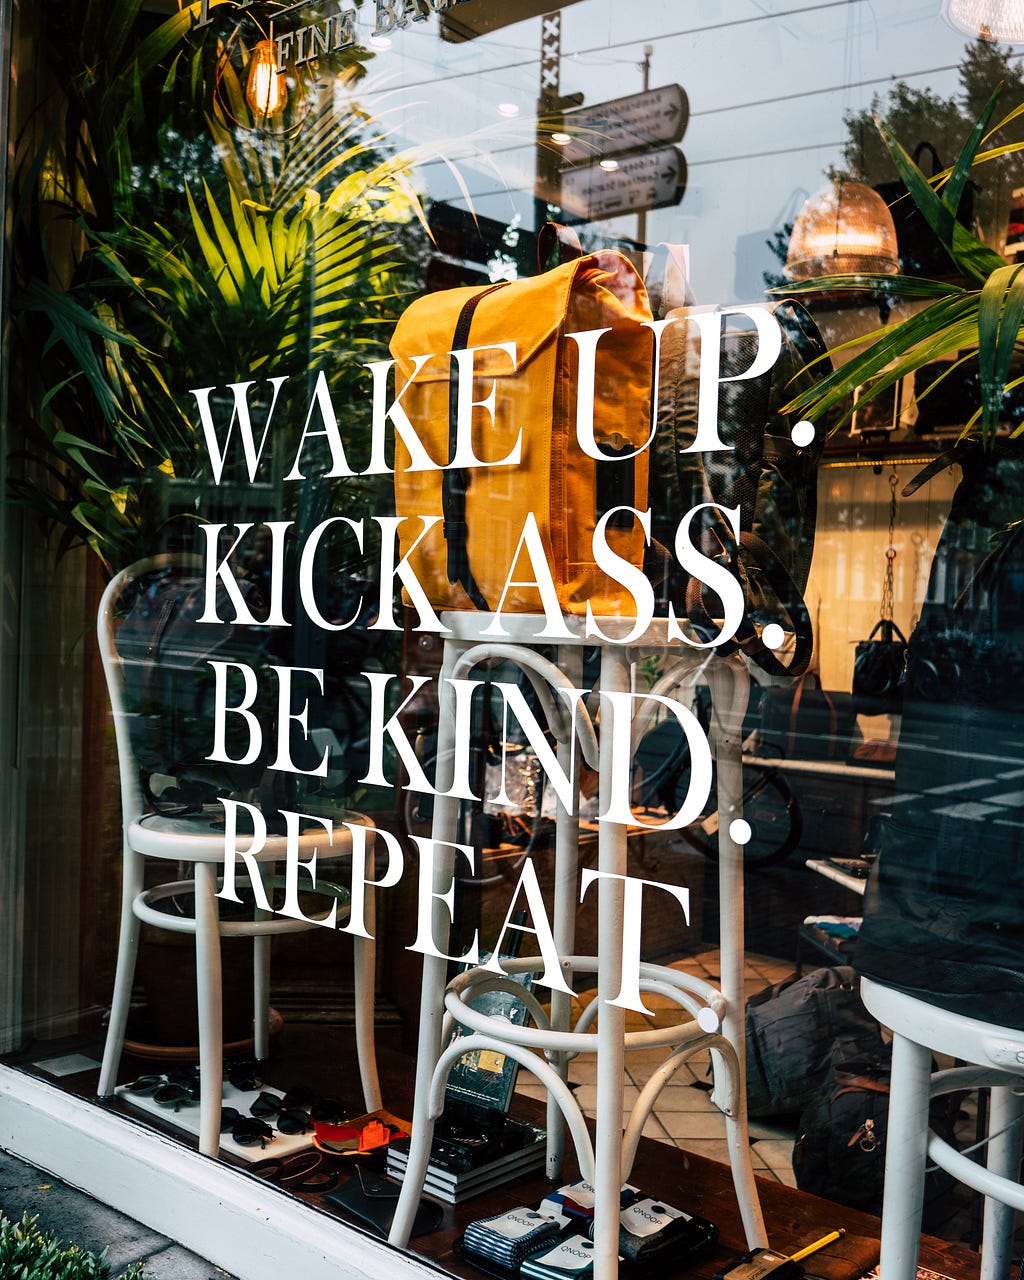 A window etching sign is displayed for passerbys to see and read, which reads: “Wake Up. Kick Ass. Be Kind. Repeat.”